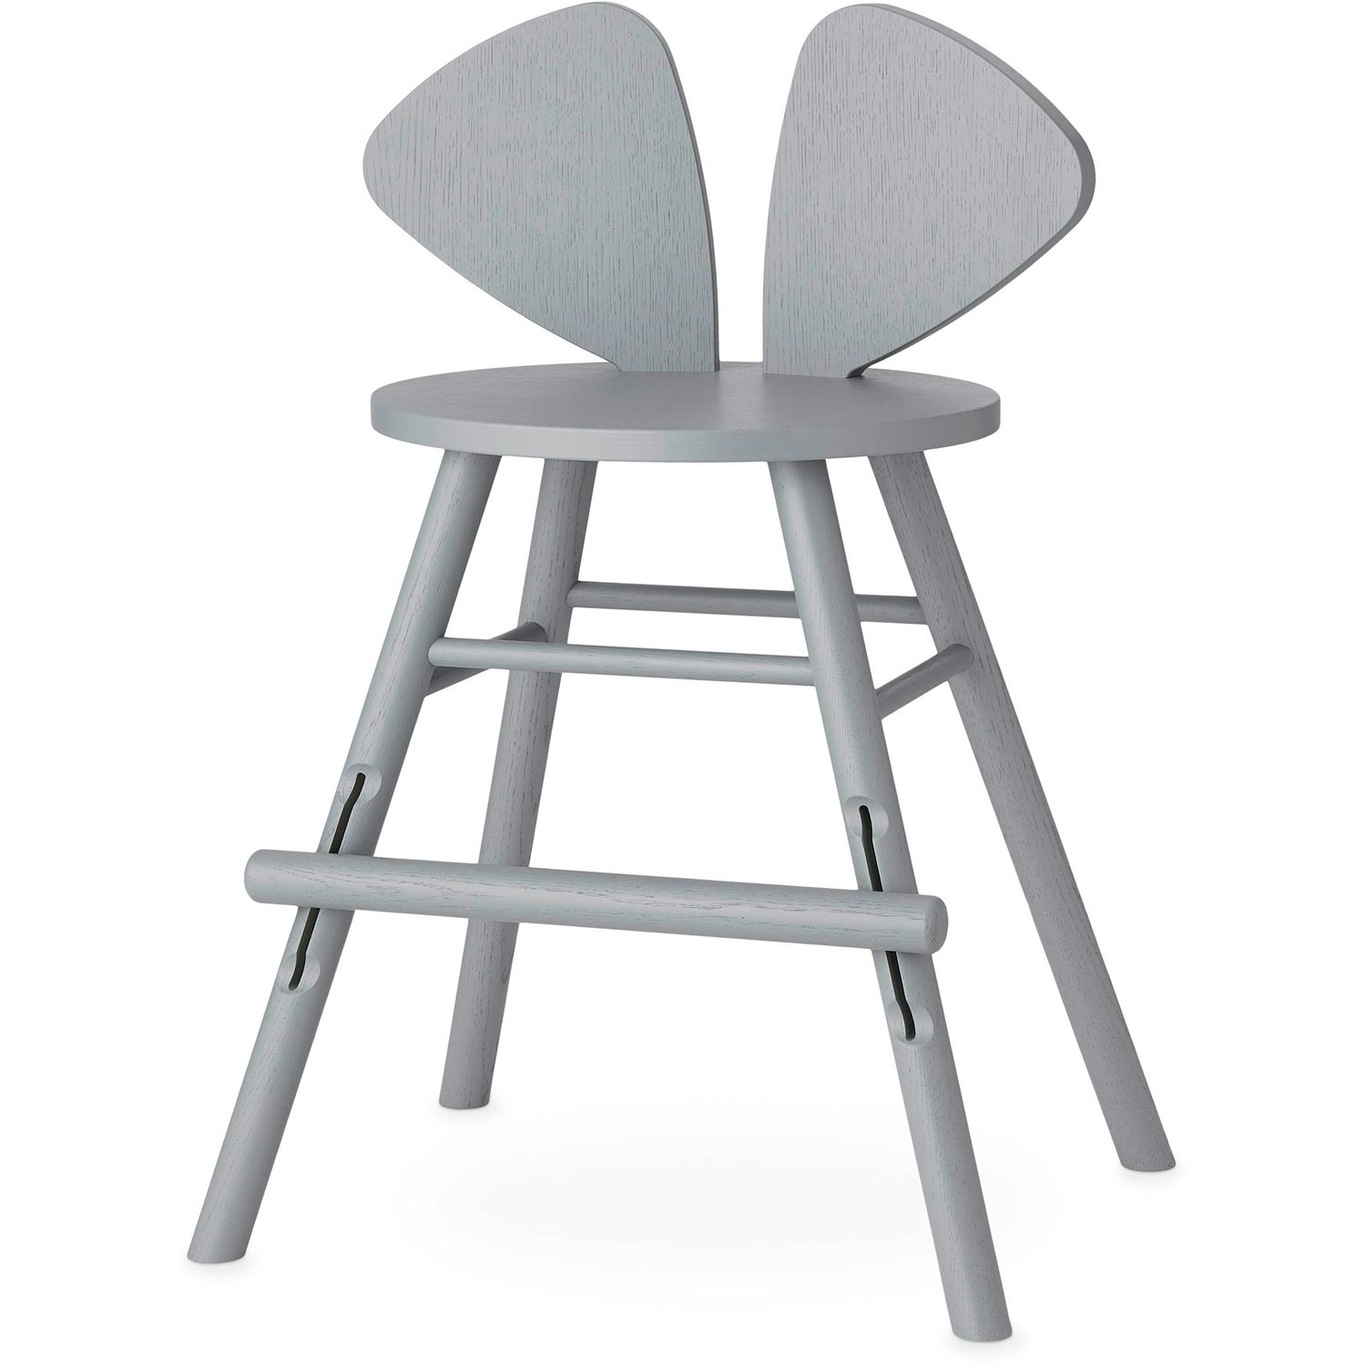 Mouse Junior Child Chair (3-9 years), Grey Ash